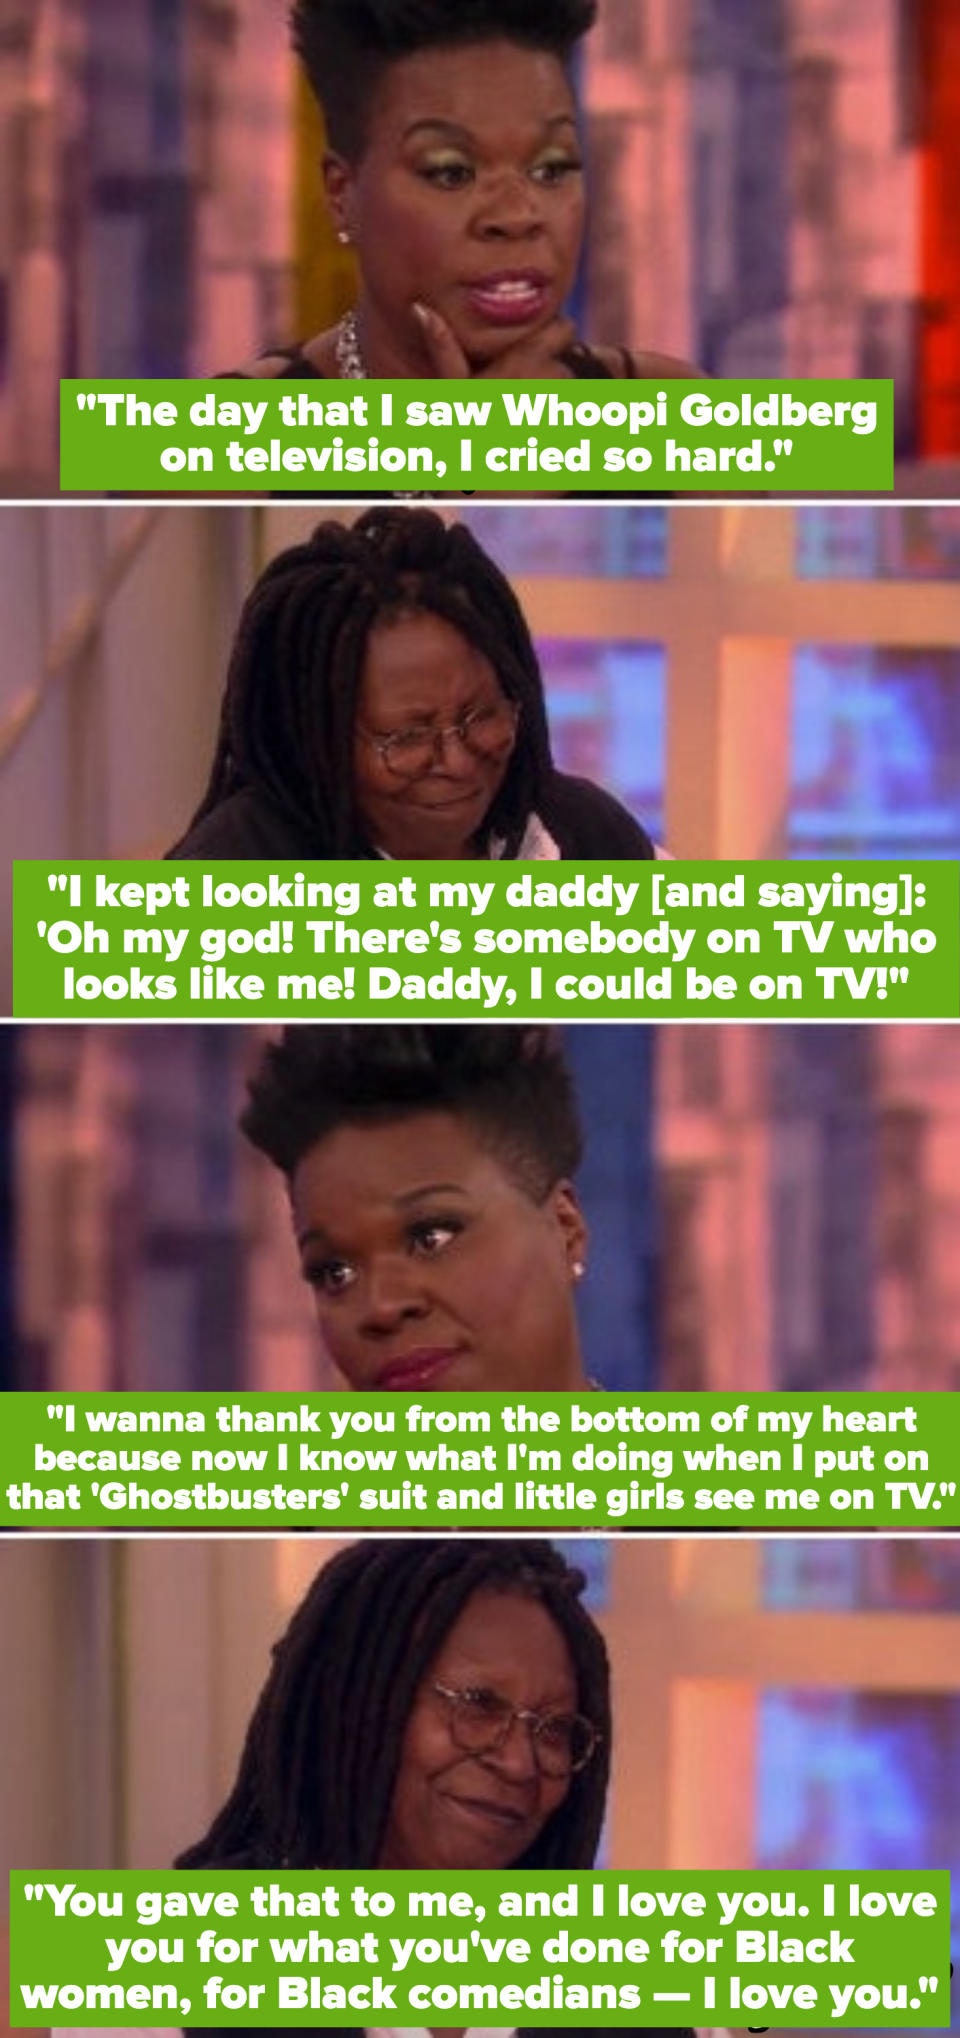 Leslie Jones telling Whoopi: "I wanna thank you from the bottom of my heart because now I know what I'm doing when I put on that 'Ghostbusters' suit and little girls see me on TV"